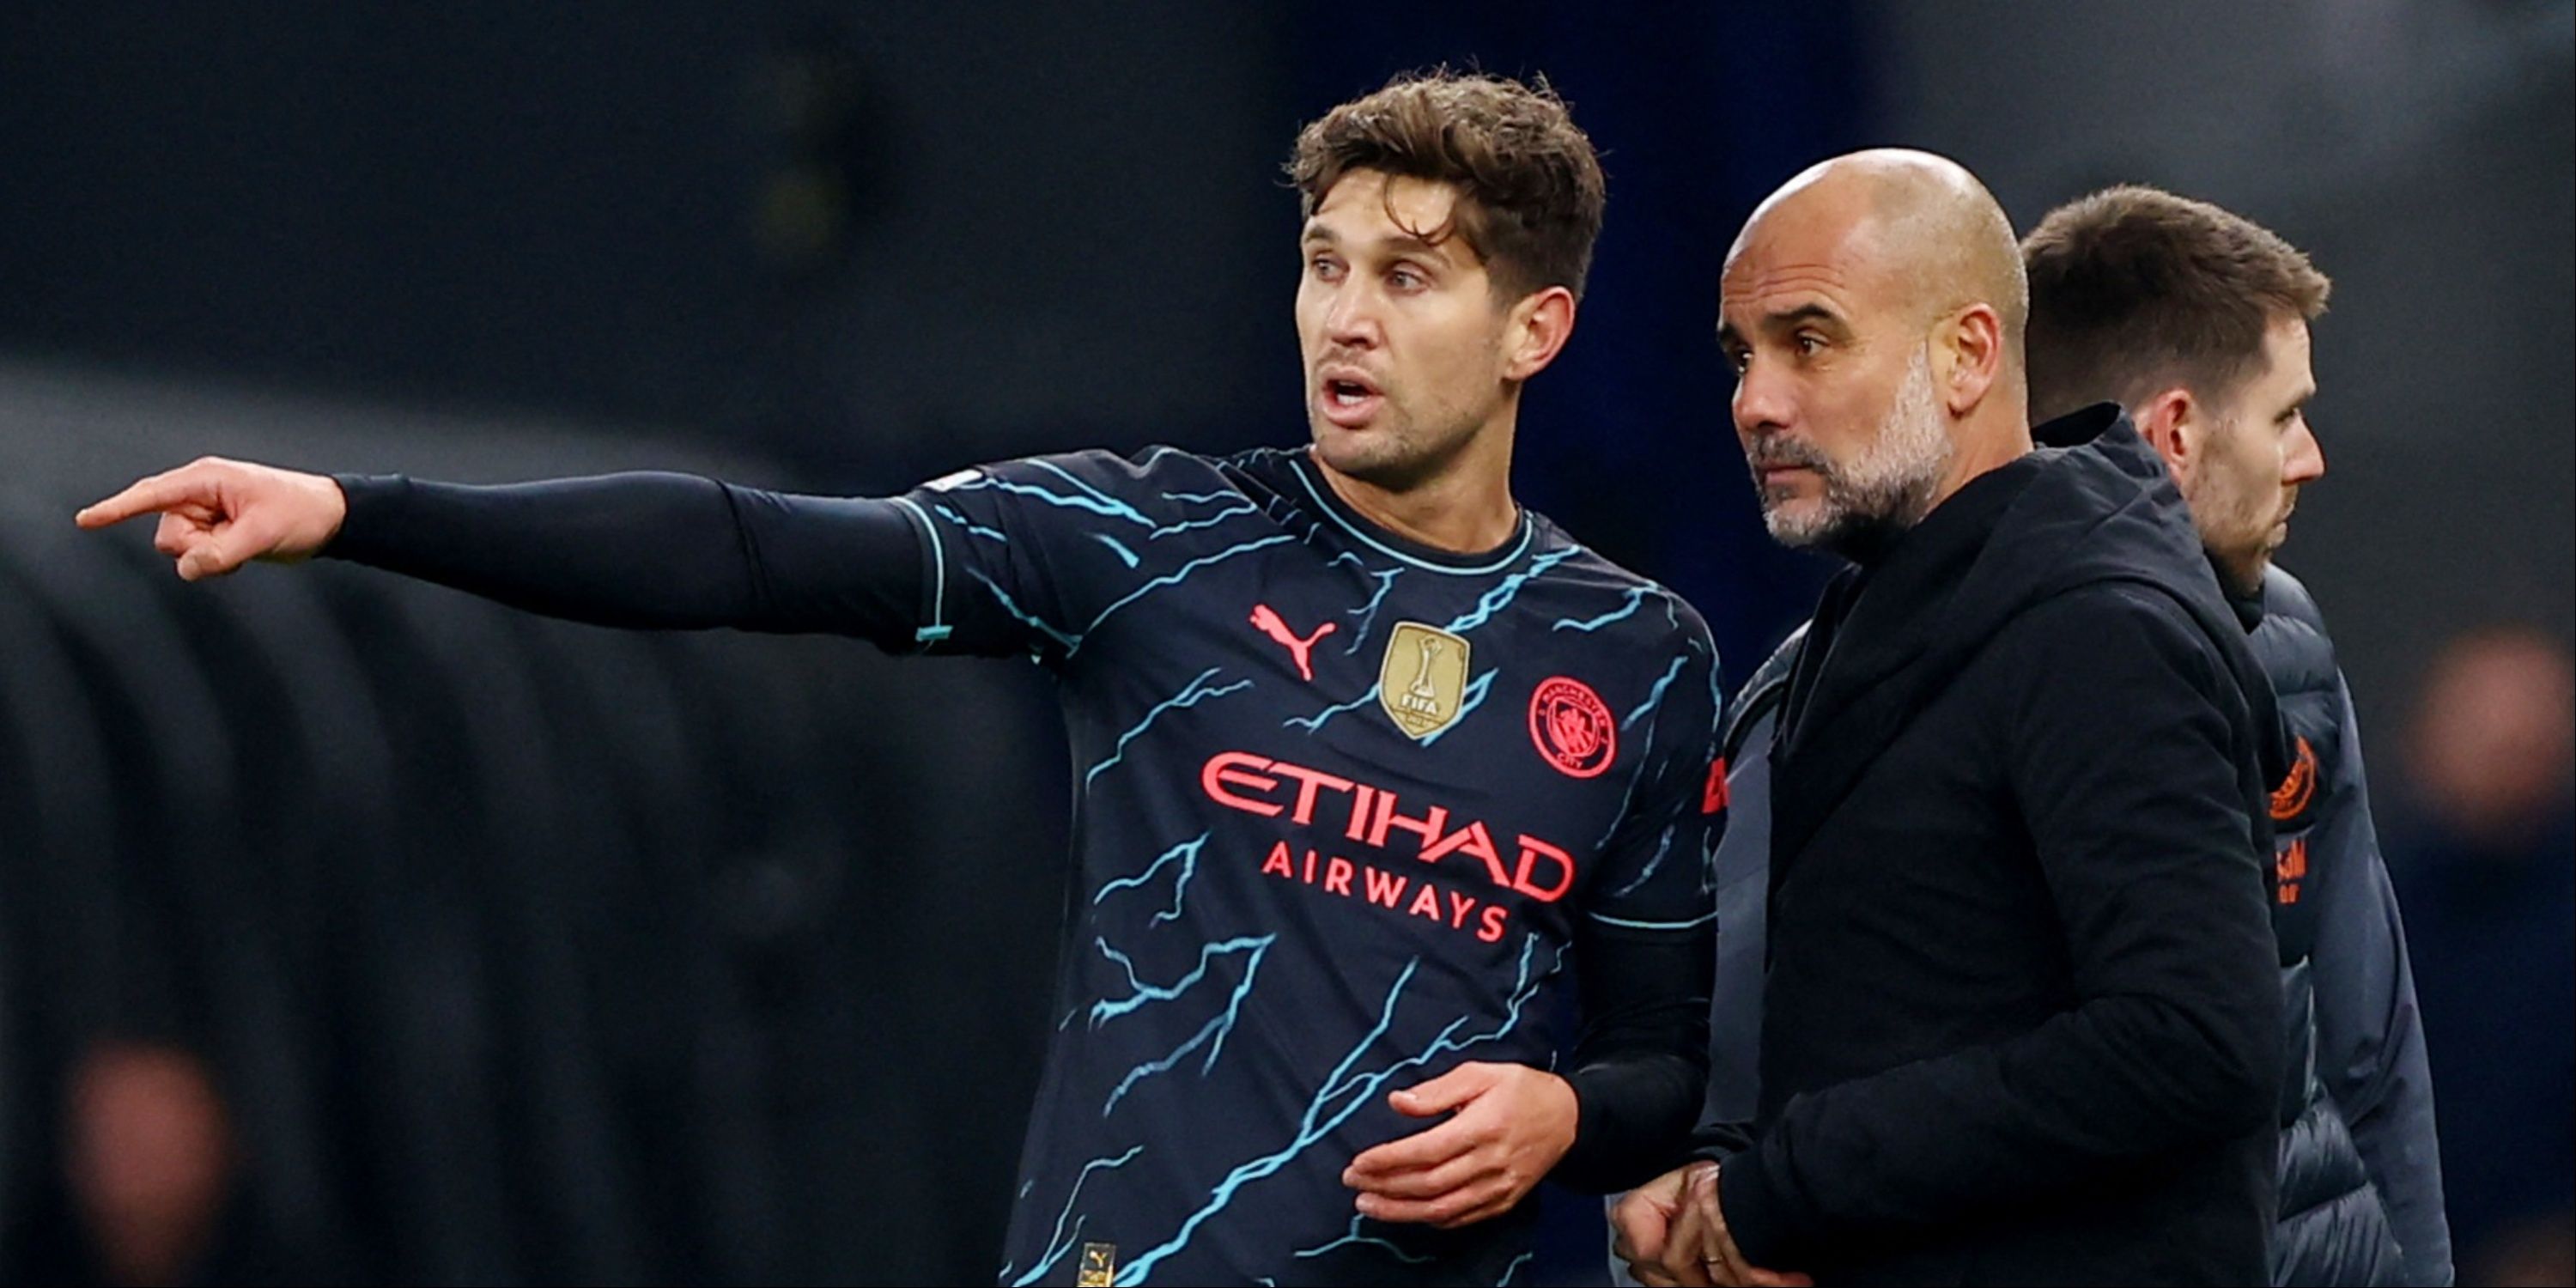 Manchester City manager Pep Guardiola and player John Stones discuss tactics on the touchline.